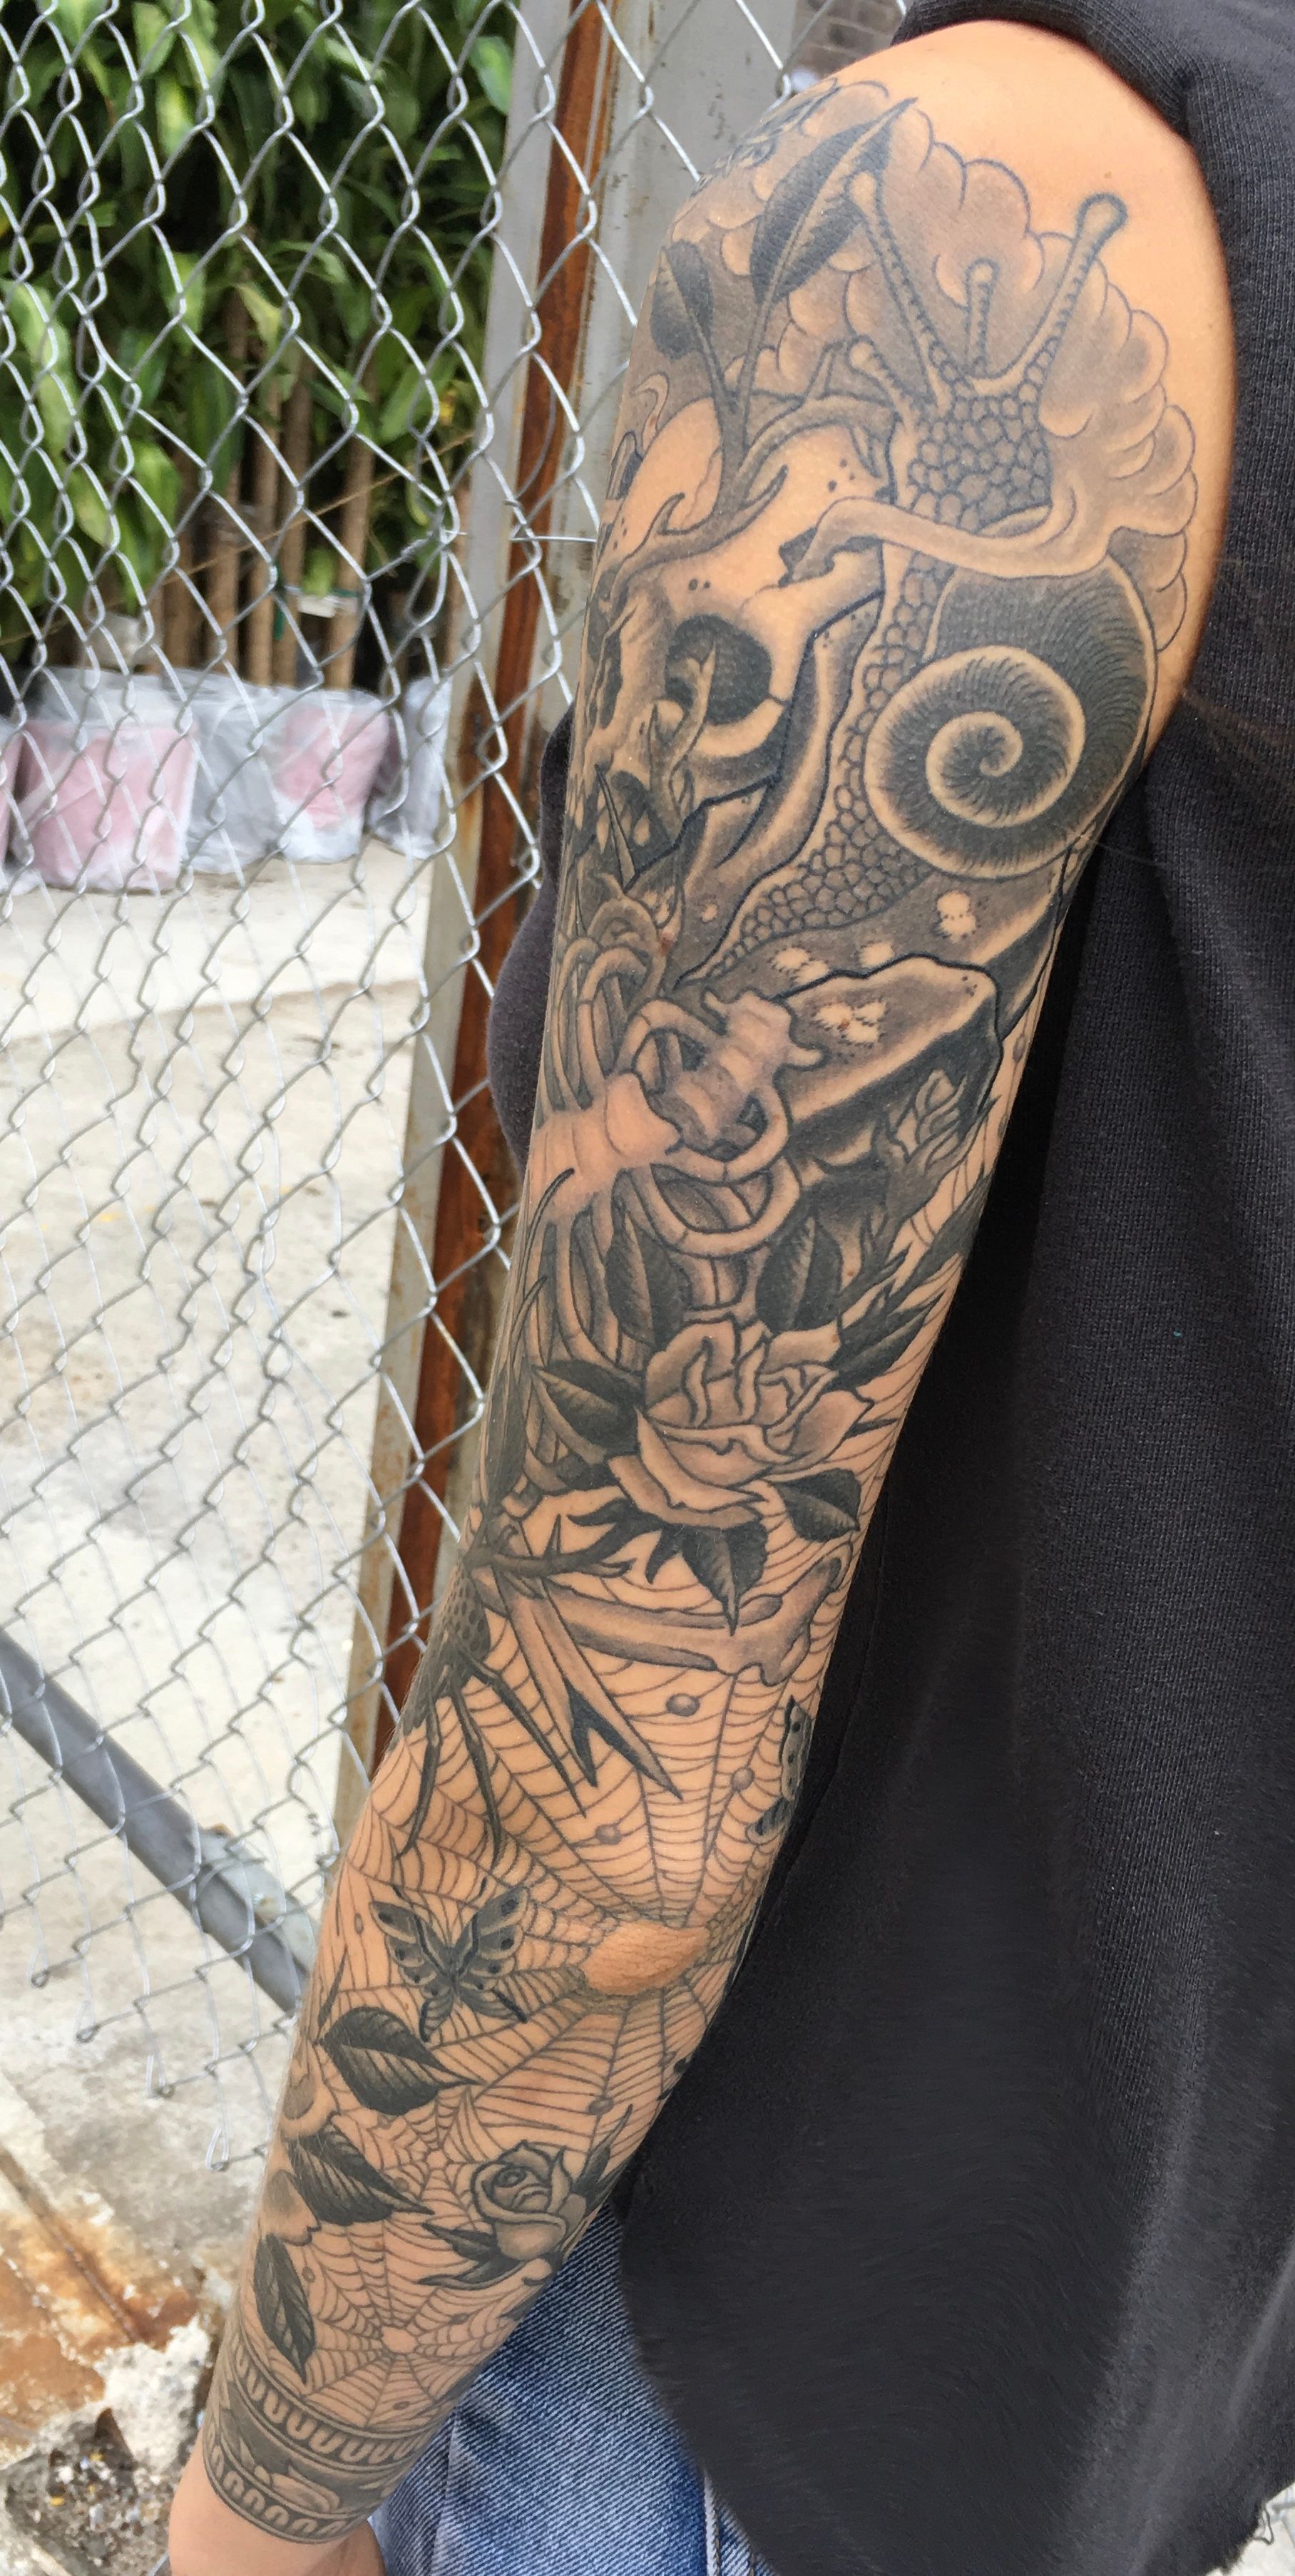 Tattoo Shop Sign and Chain Link Fence Editorial Photo  Image of chain  pandemic 217035646